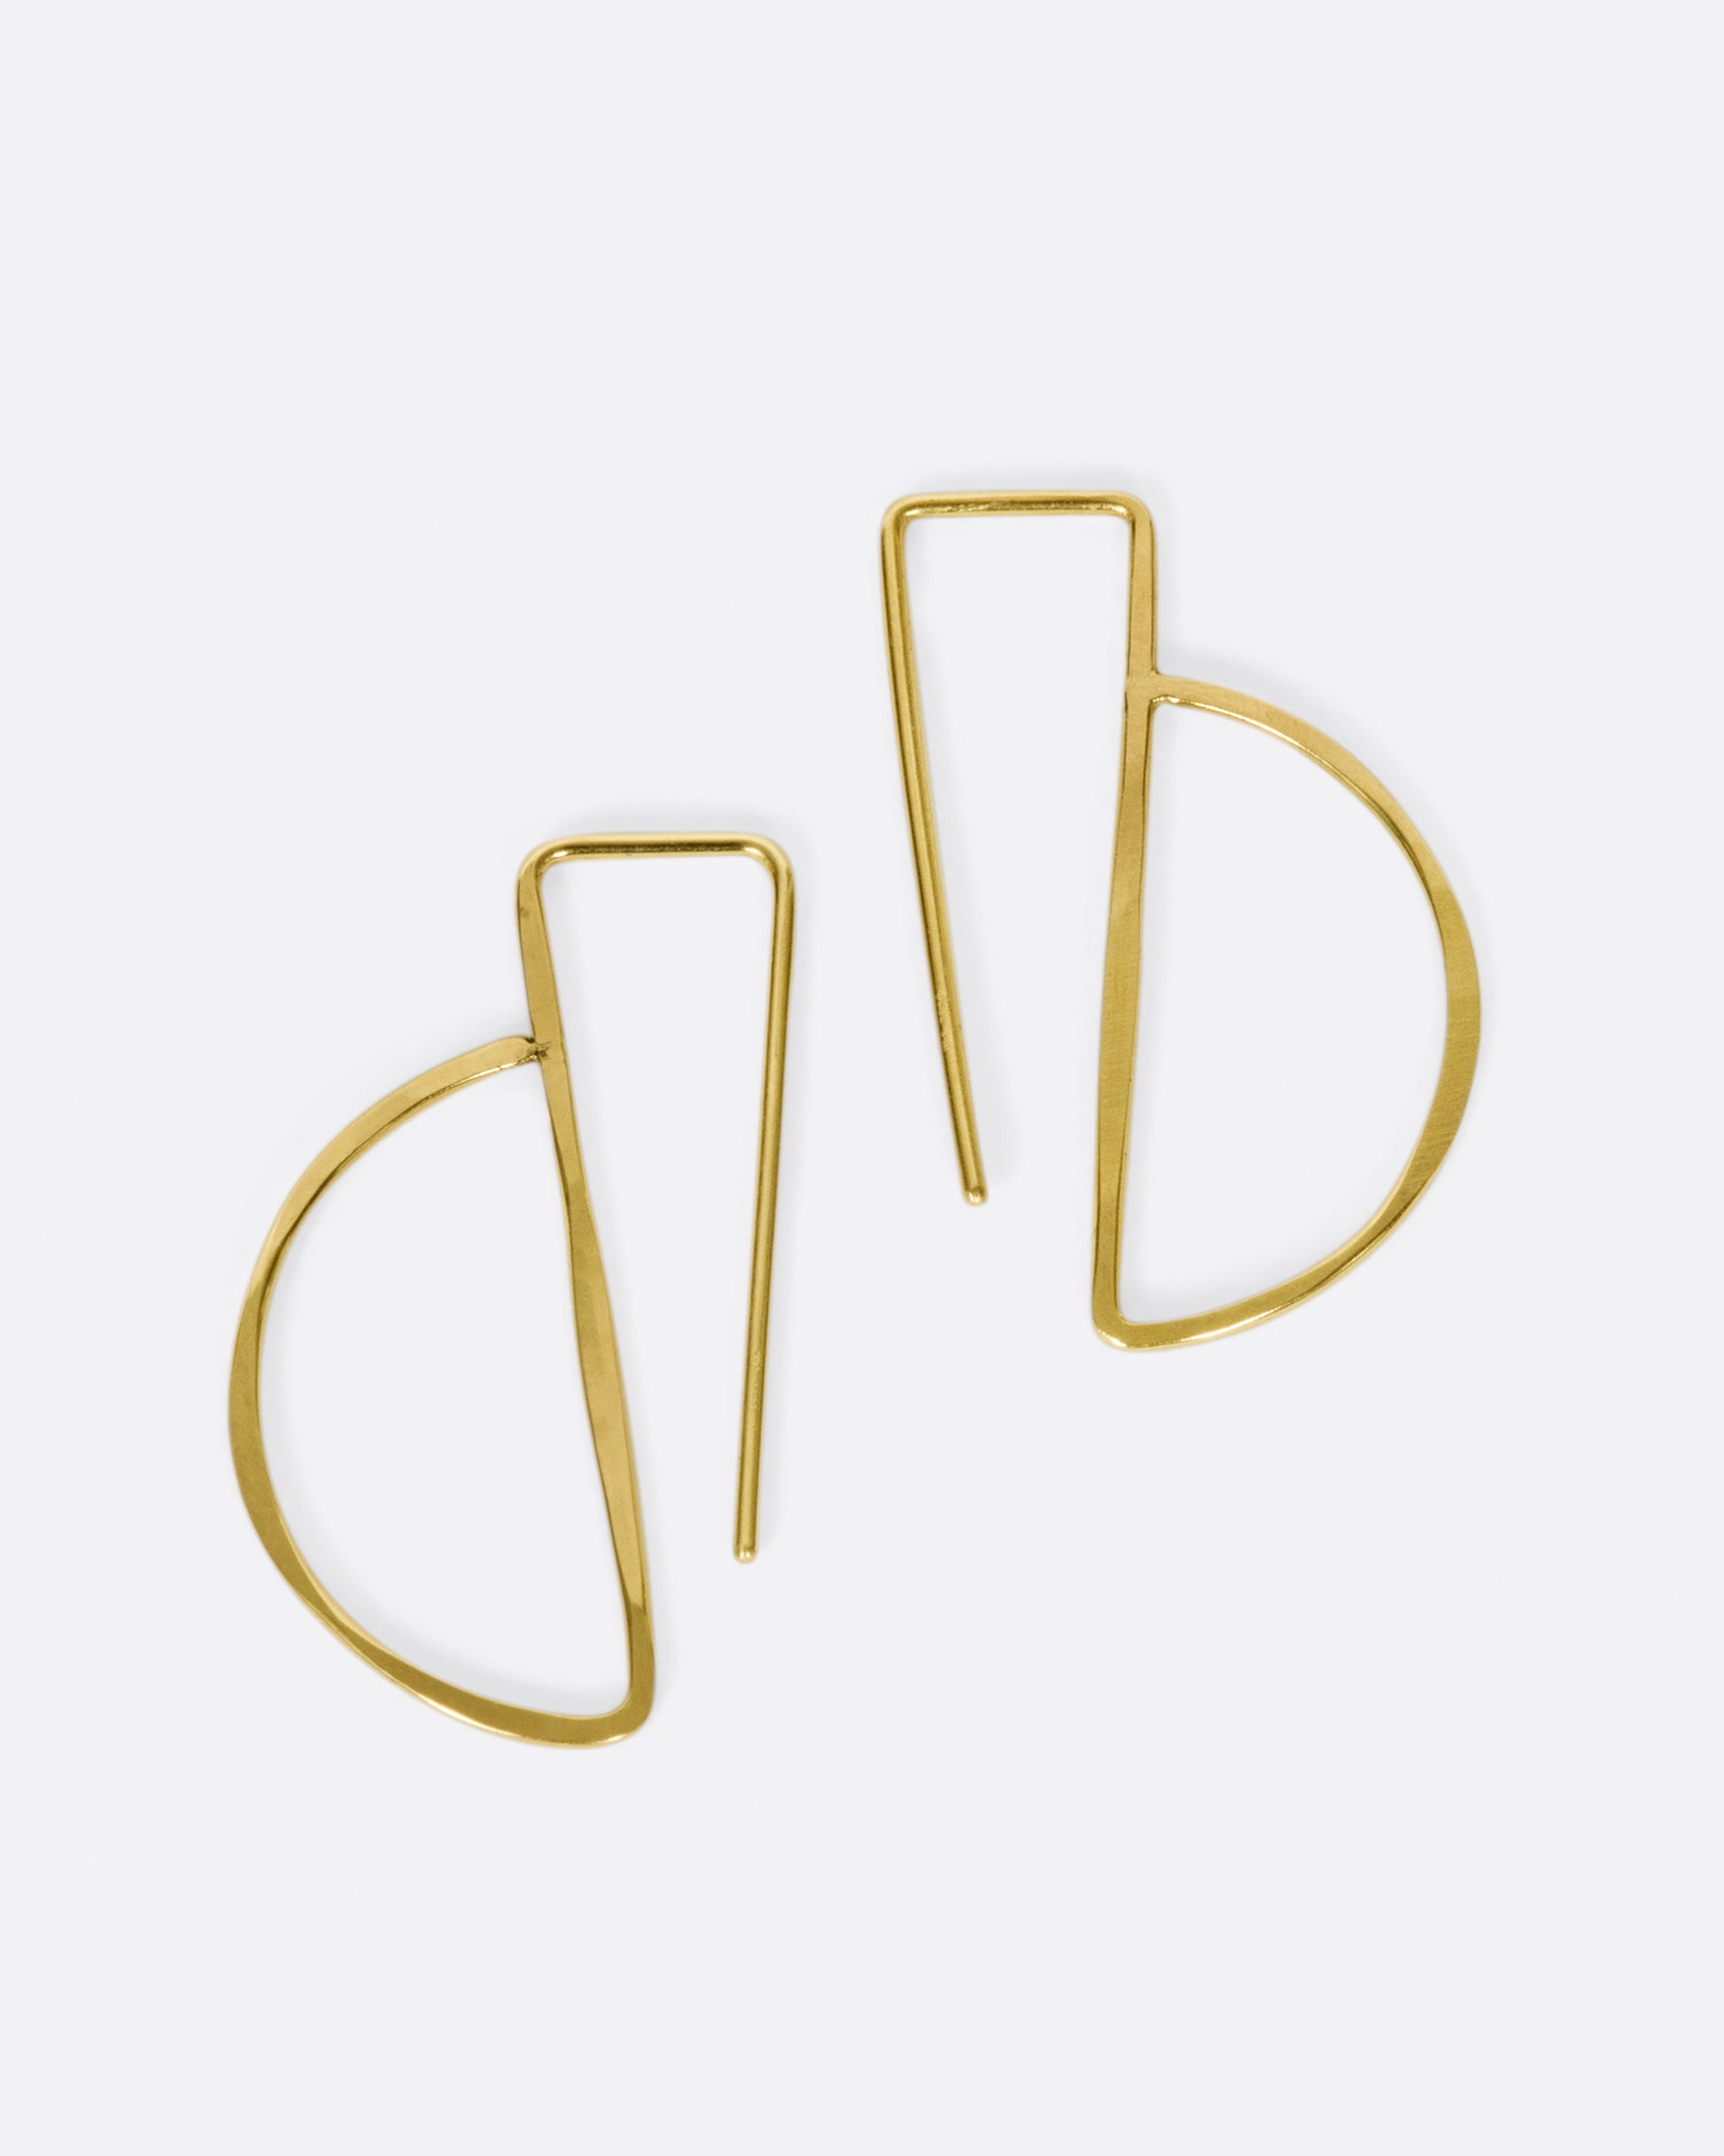 These hammered gold earrings thread through the ear so that the straight bar sits comfortably behind your lobe and the curve shows in front.